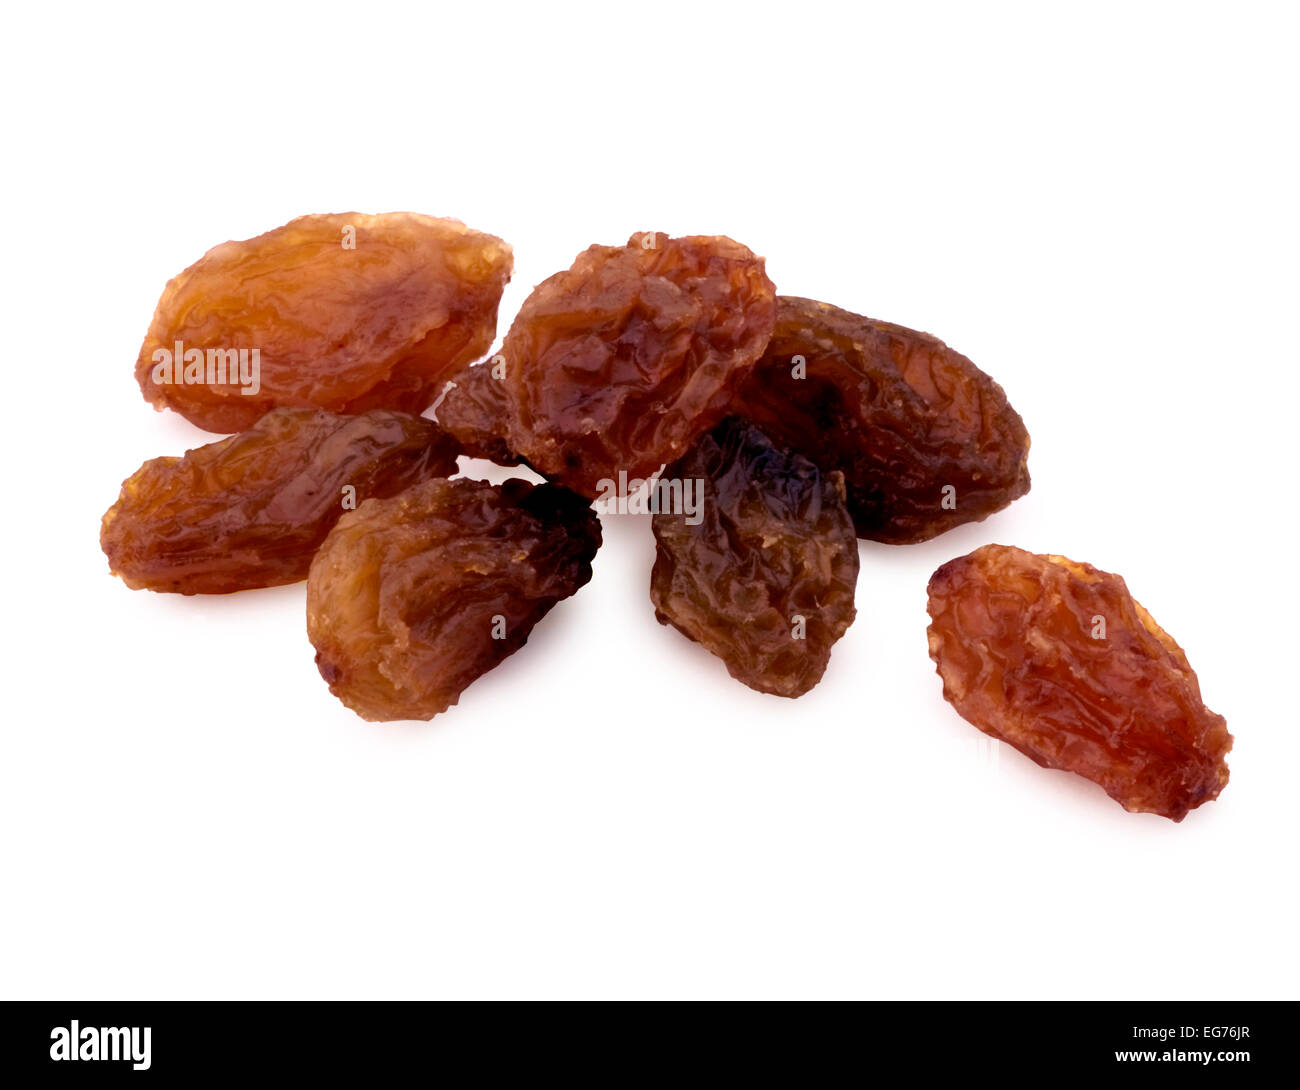 Sultana Grape High Resolution Stock Photography and Images - Alamy